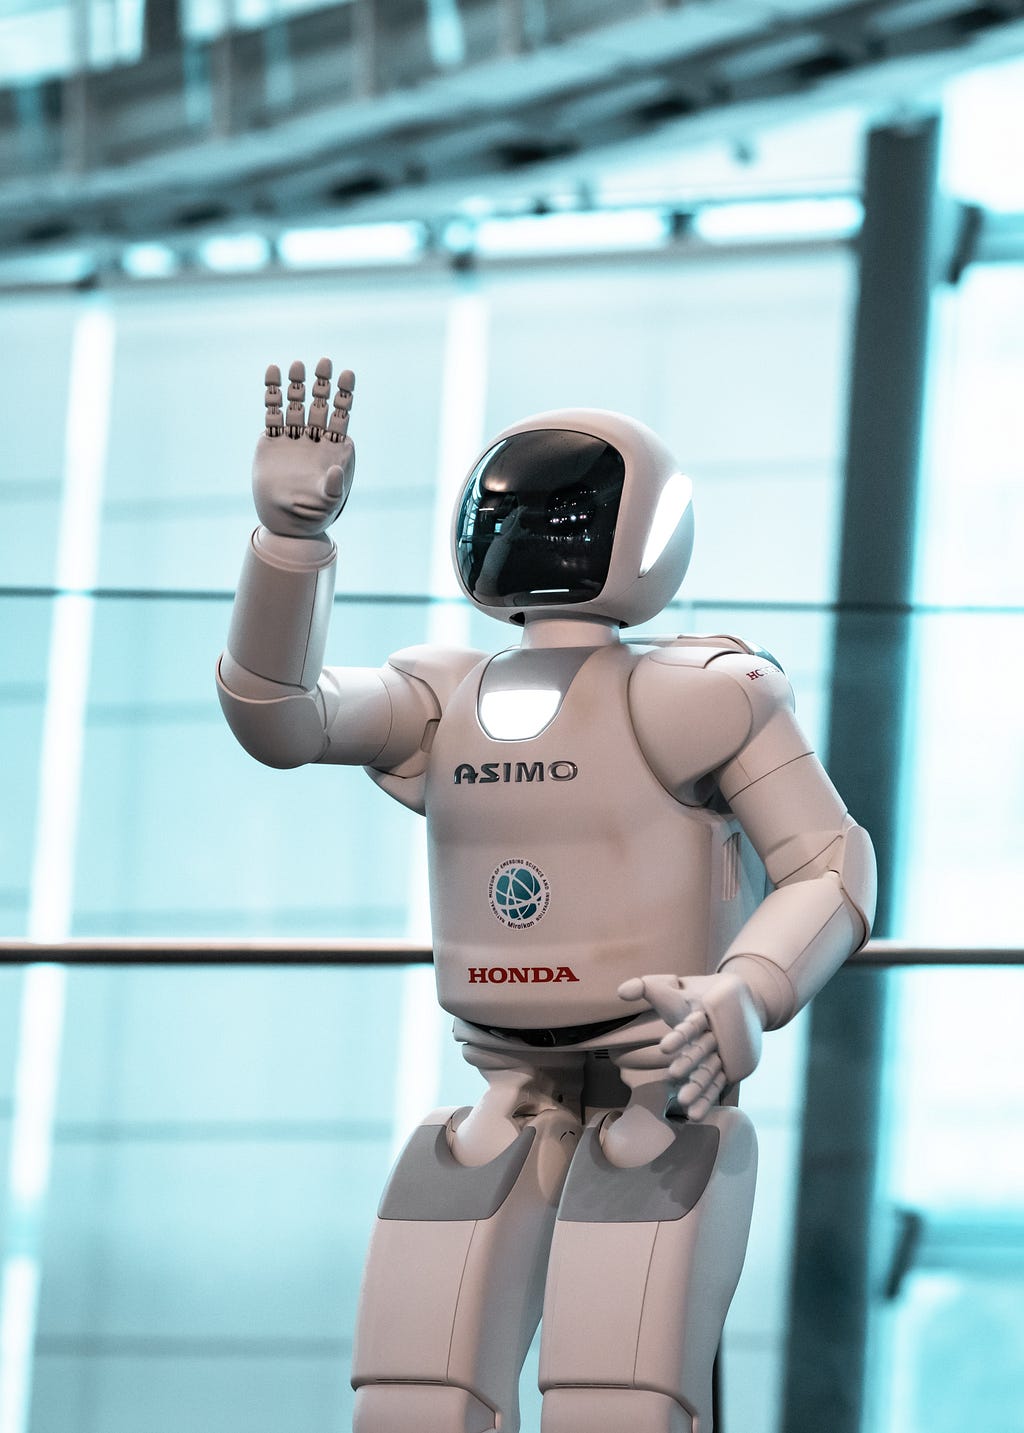 A photograph of Asimo, the robot developed by Honda.